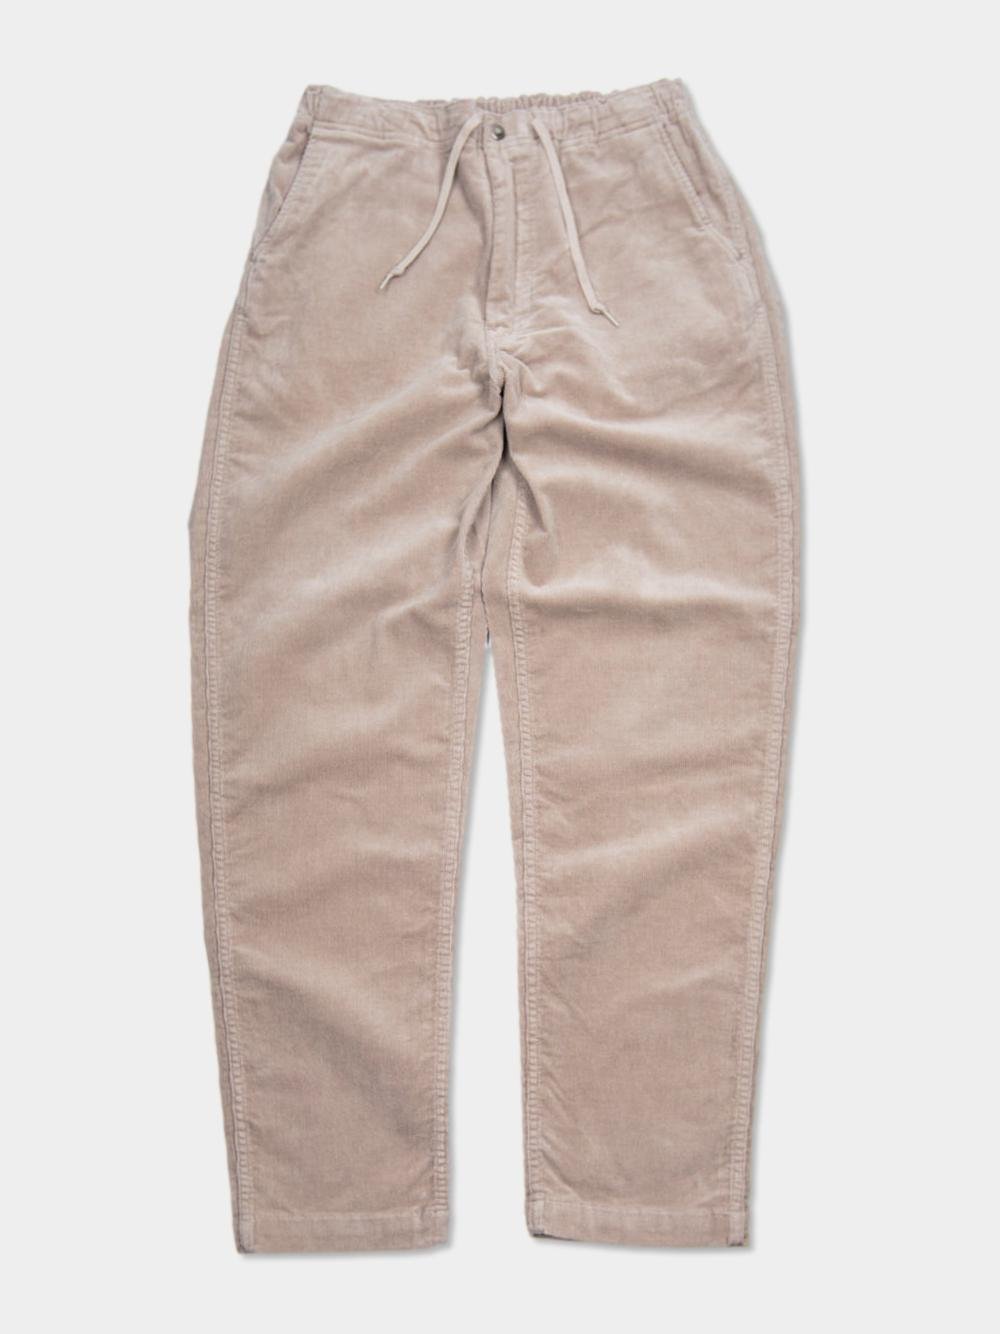 New Yorker Pant in Light Grey Stretch Corduroy —